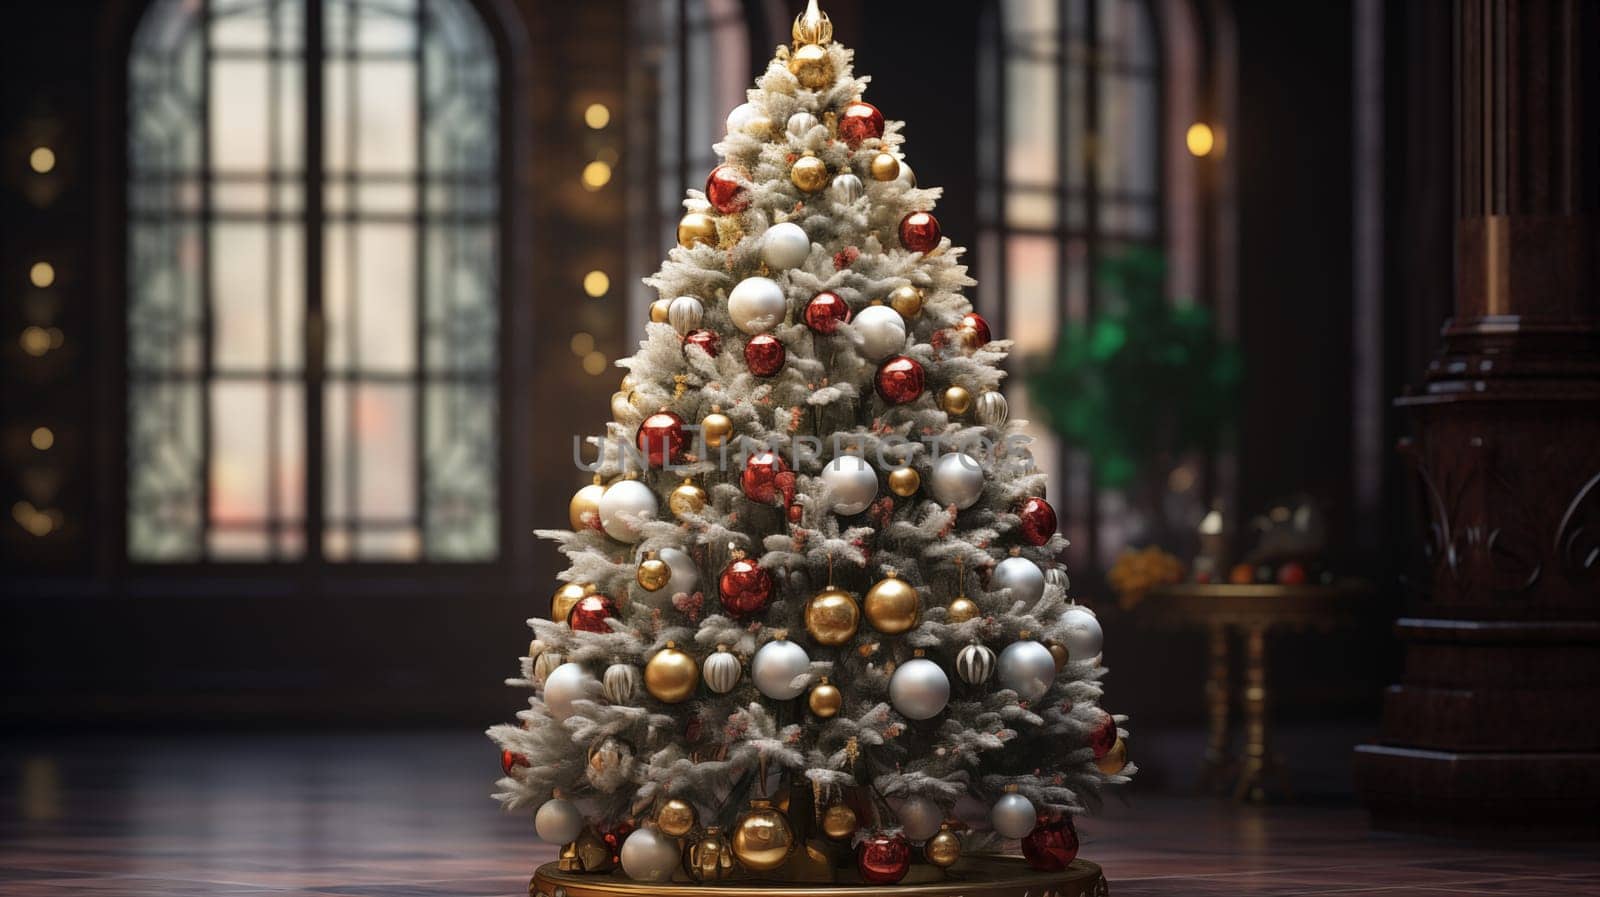 A beautiful silver Christmas tree stands in a large antique living room with large windows.